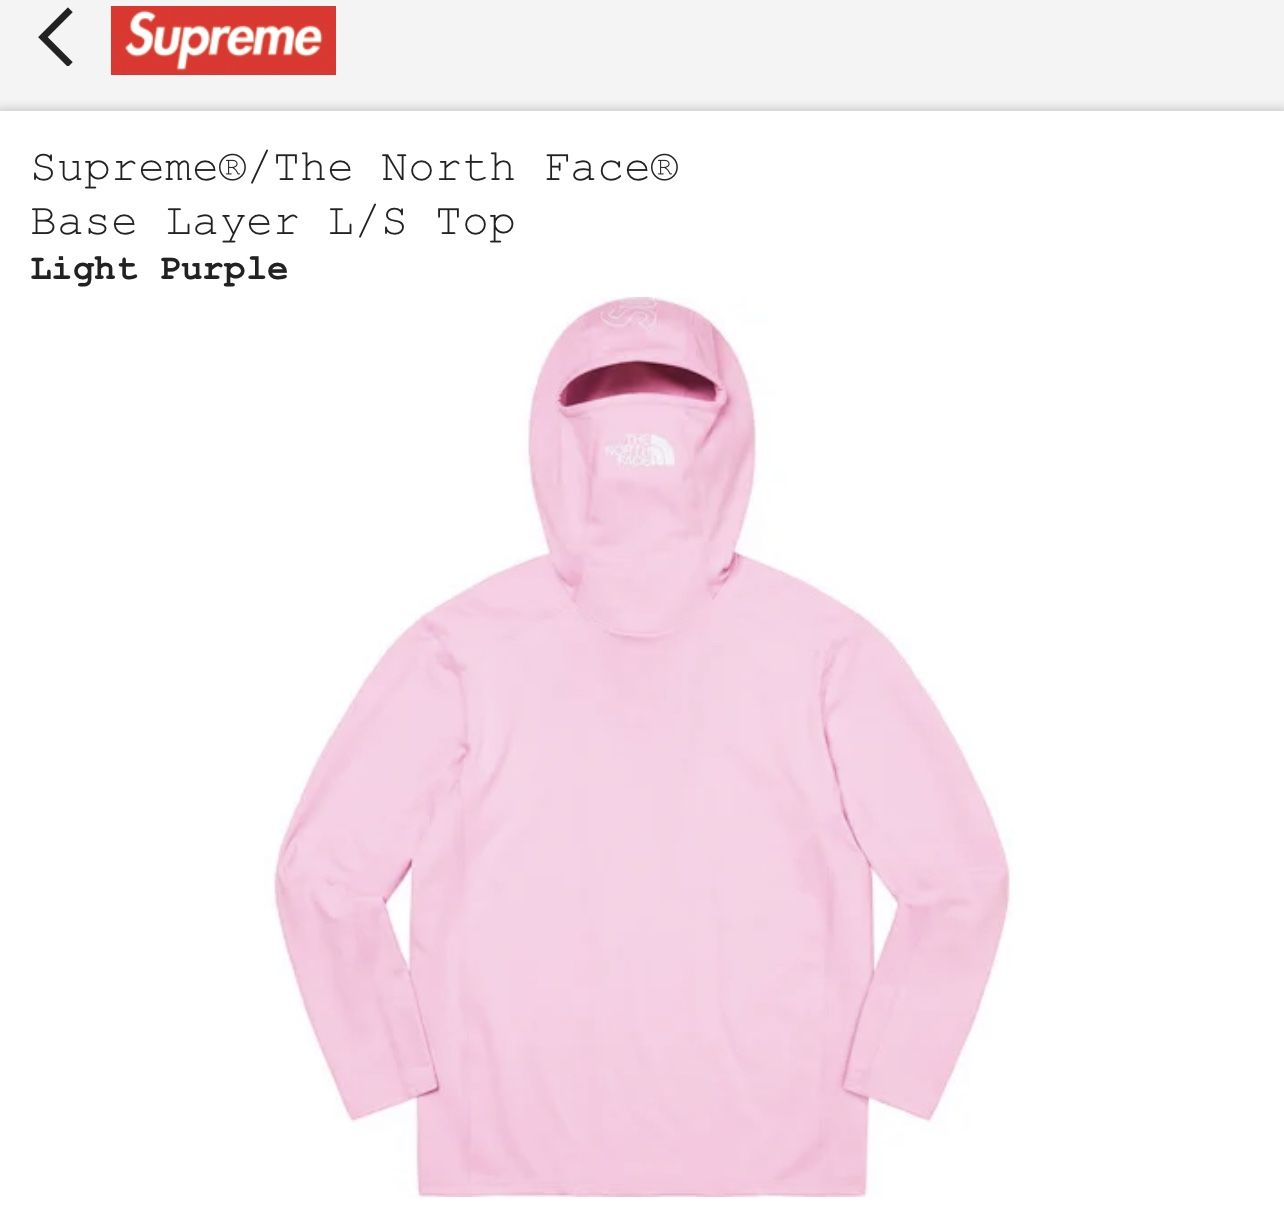 Supreme The North Face Base Layer Light Purple Large